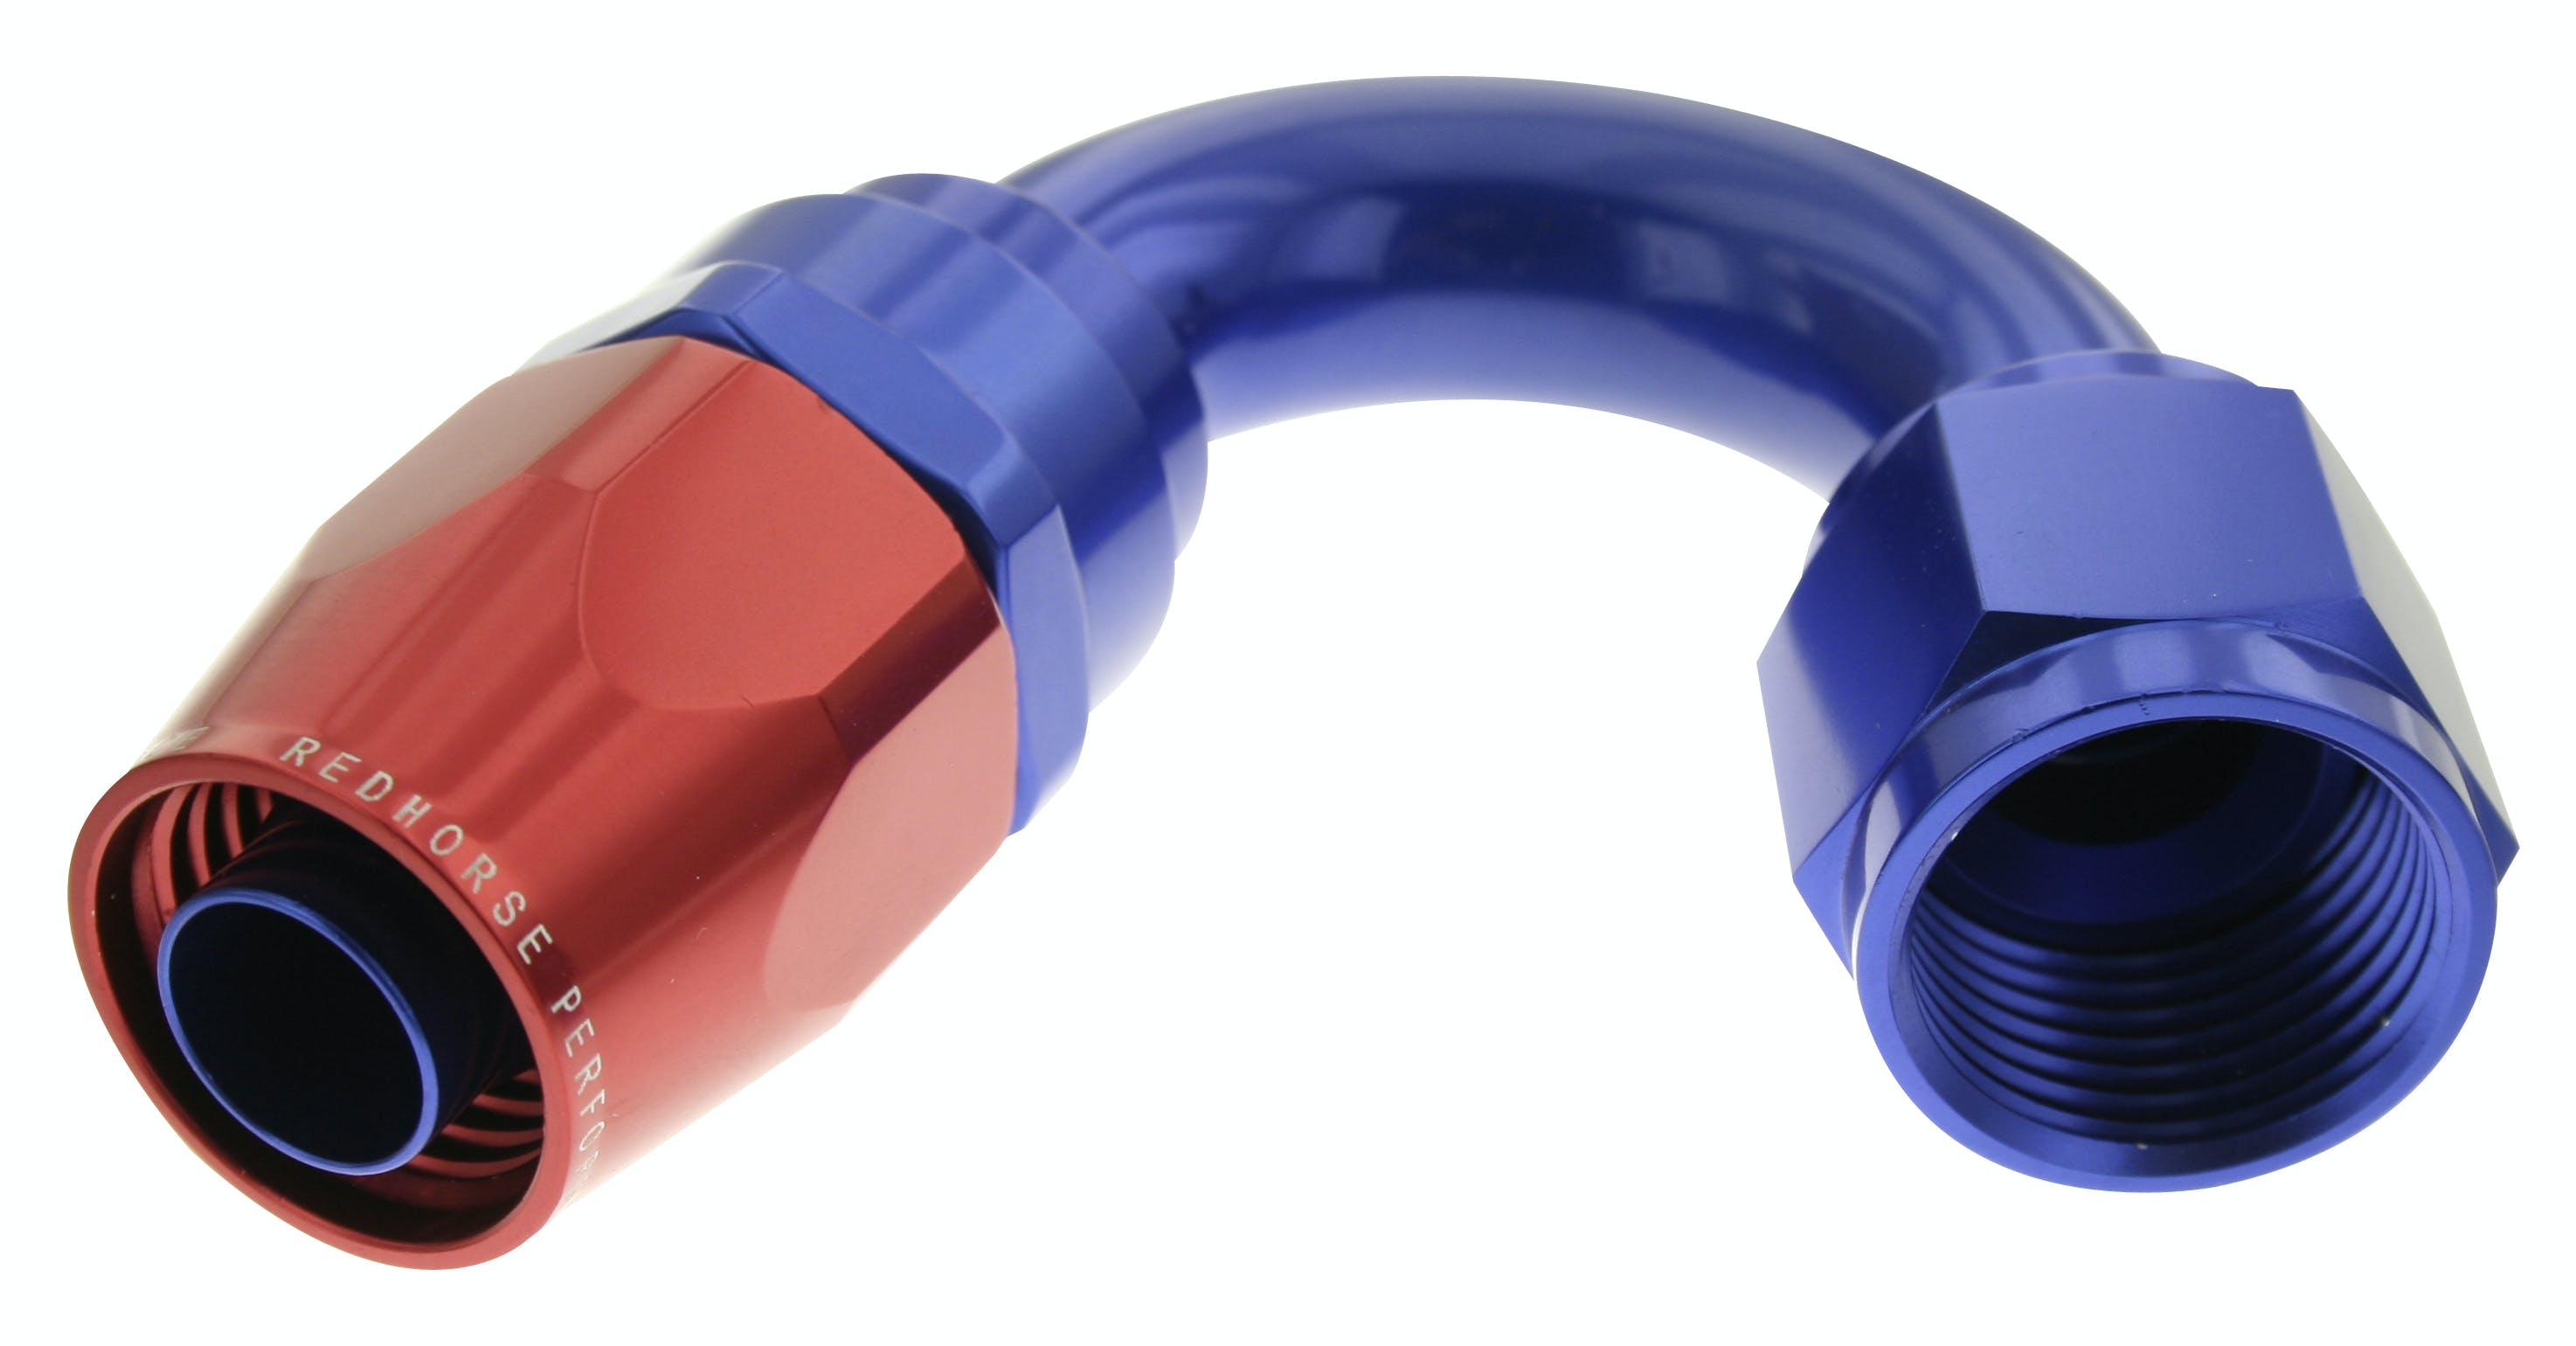 Redhorse Performance 1150-06-1 -06 150 degree Female Aluminum Hose End - red and blue